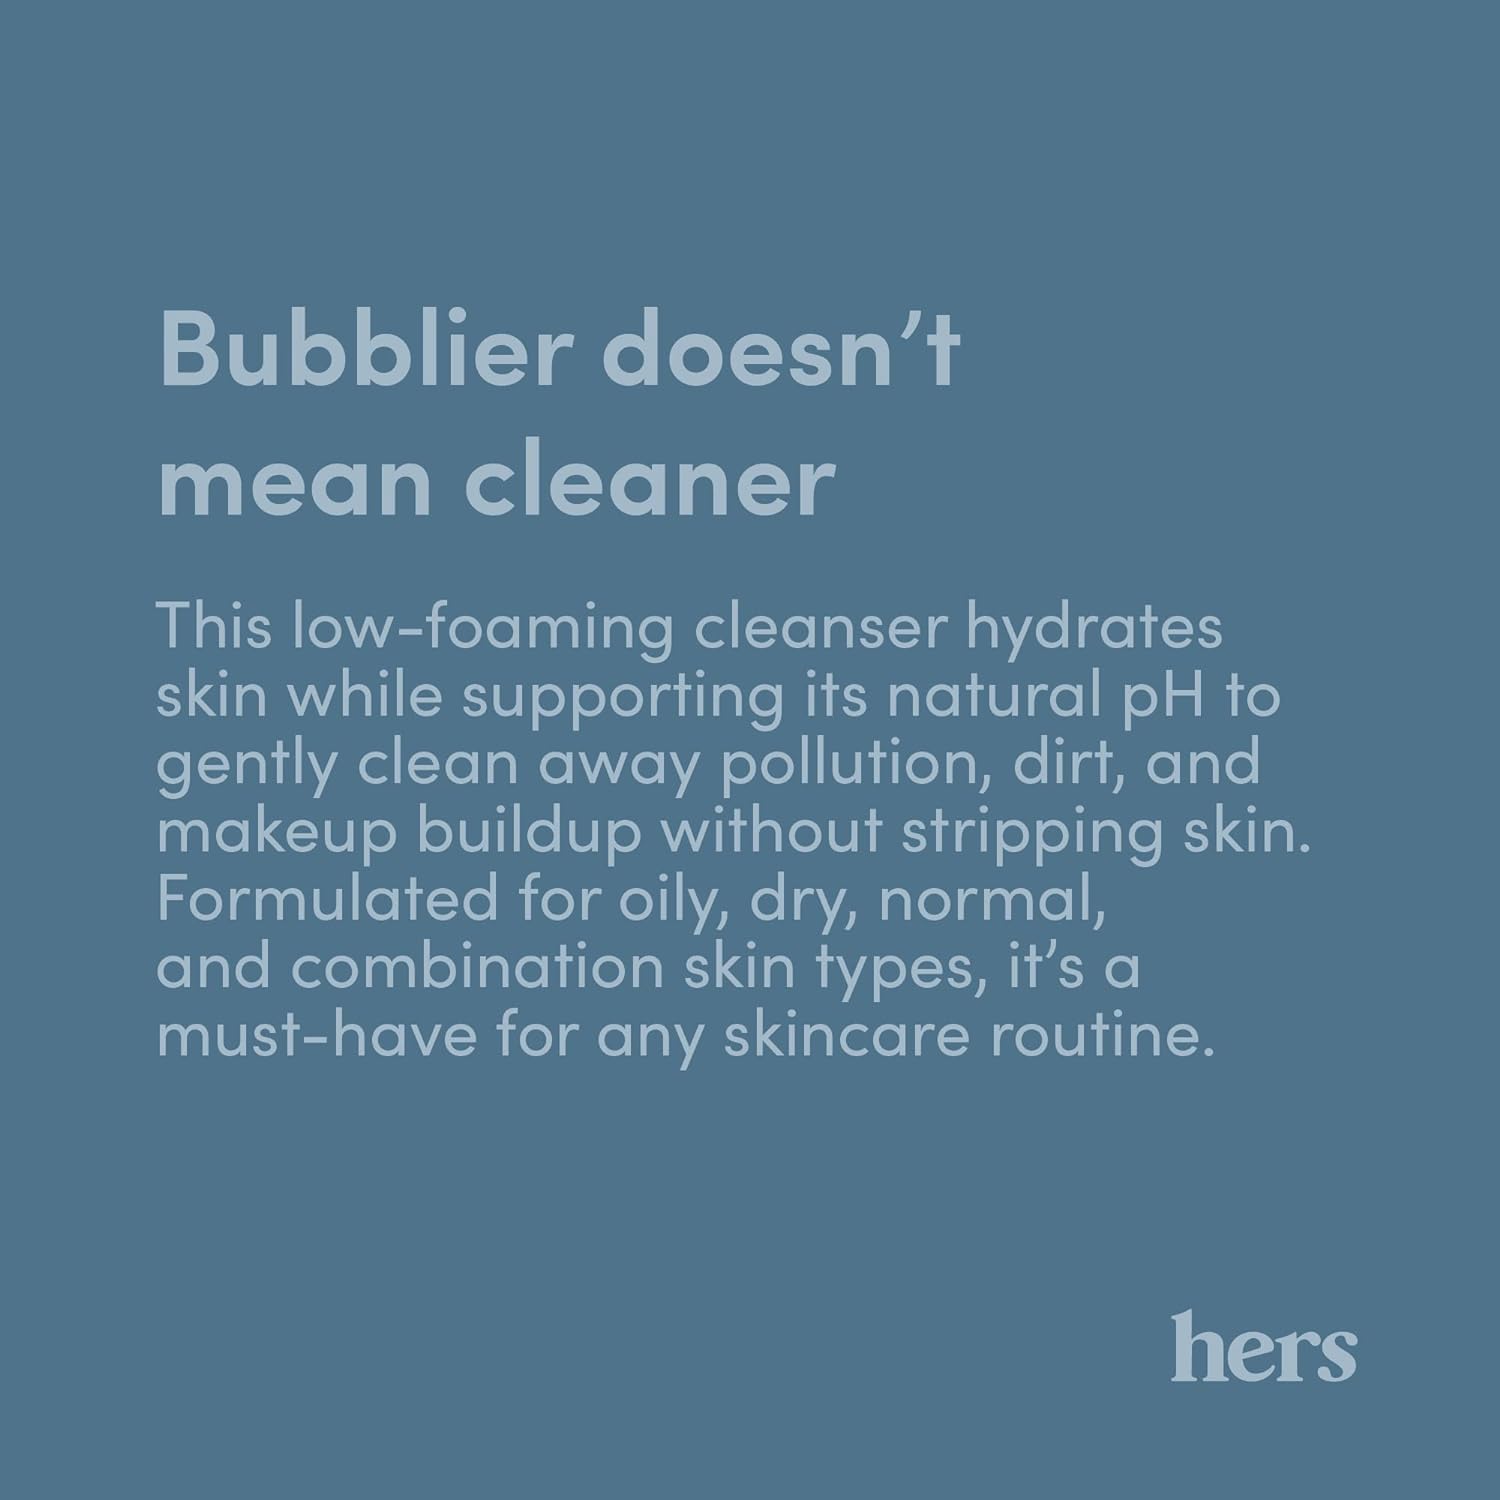 hers Clear Waters Hydrating Cleanser - Squalane Cleanser Face Wash Made for All Skin Types - Supports Skins Natural pH - Contains Hyaluronic Acid, Squalane, and Green Tea Extract - 6.8 fl Oz : Beauty & Personal Care